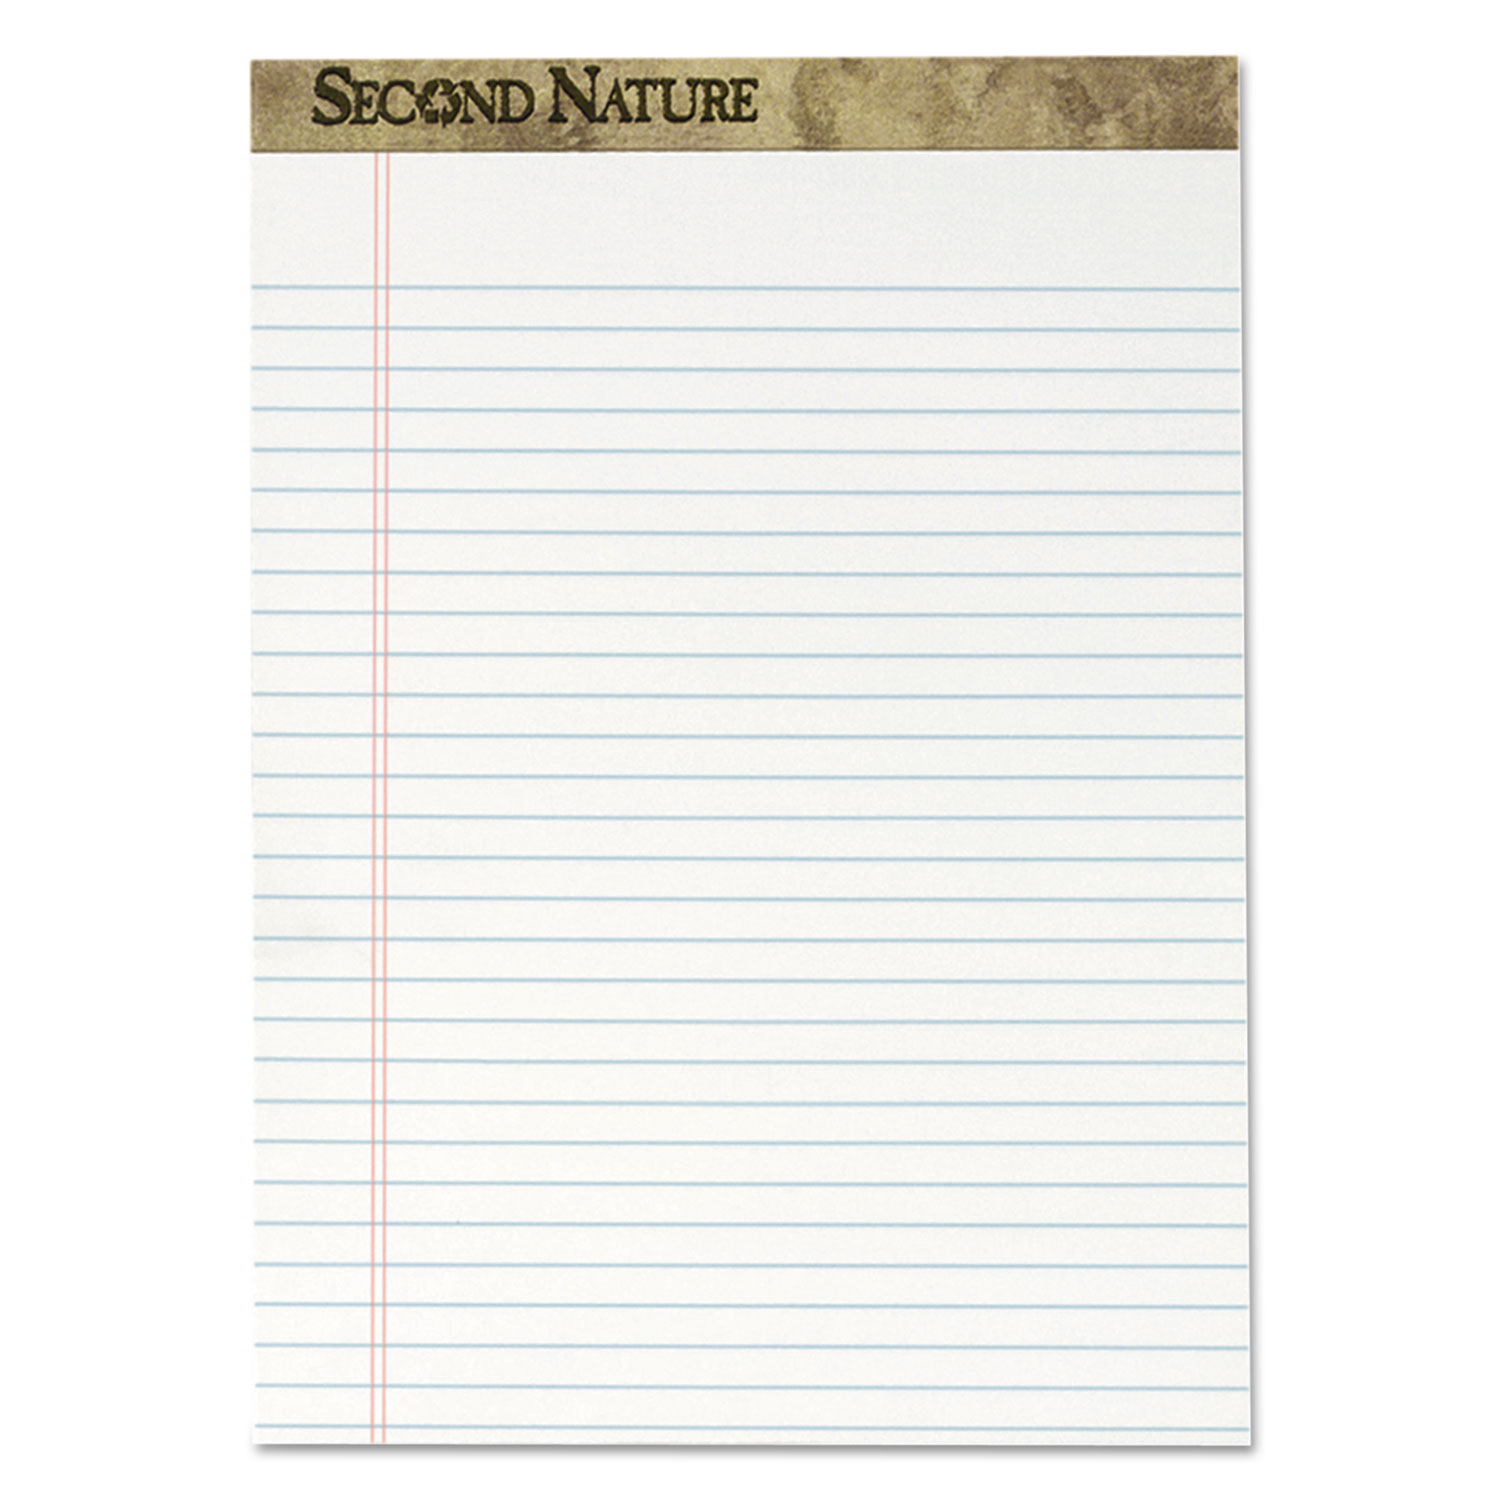 Second Nature Recycled Letter Pads, Lgl/Red Margin Rule, White, 50 Sheets, Dozen